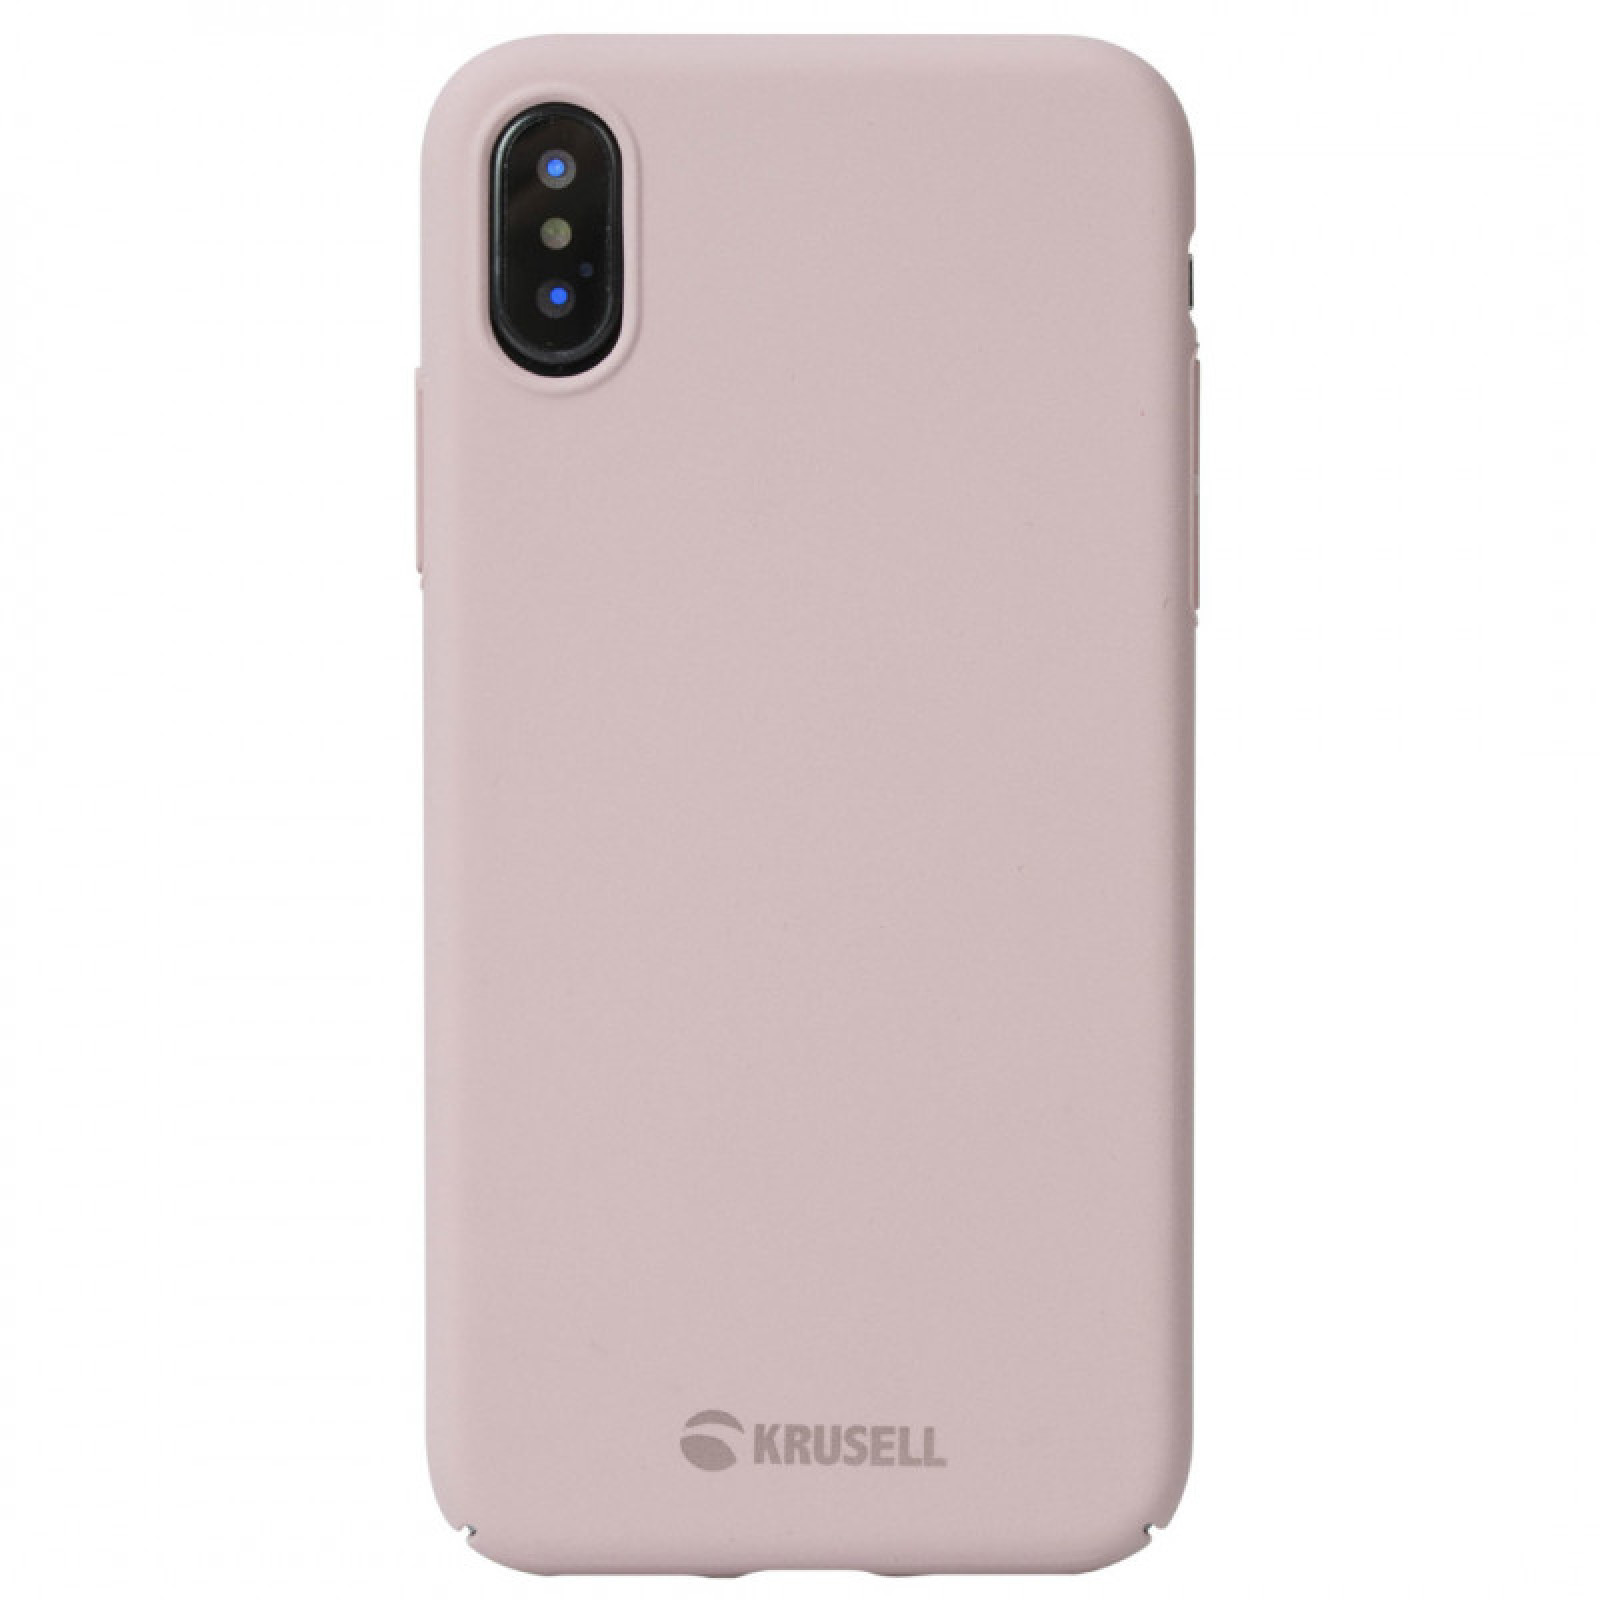 Гръб Krusell Sandby Cover за Apple Iphone Xs Max - Dusty Pink